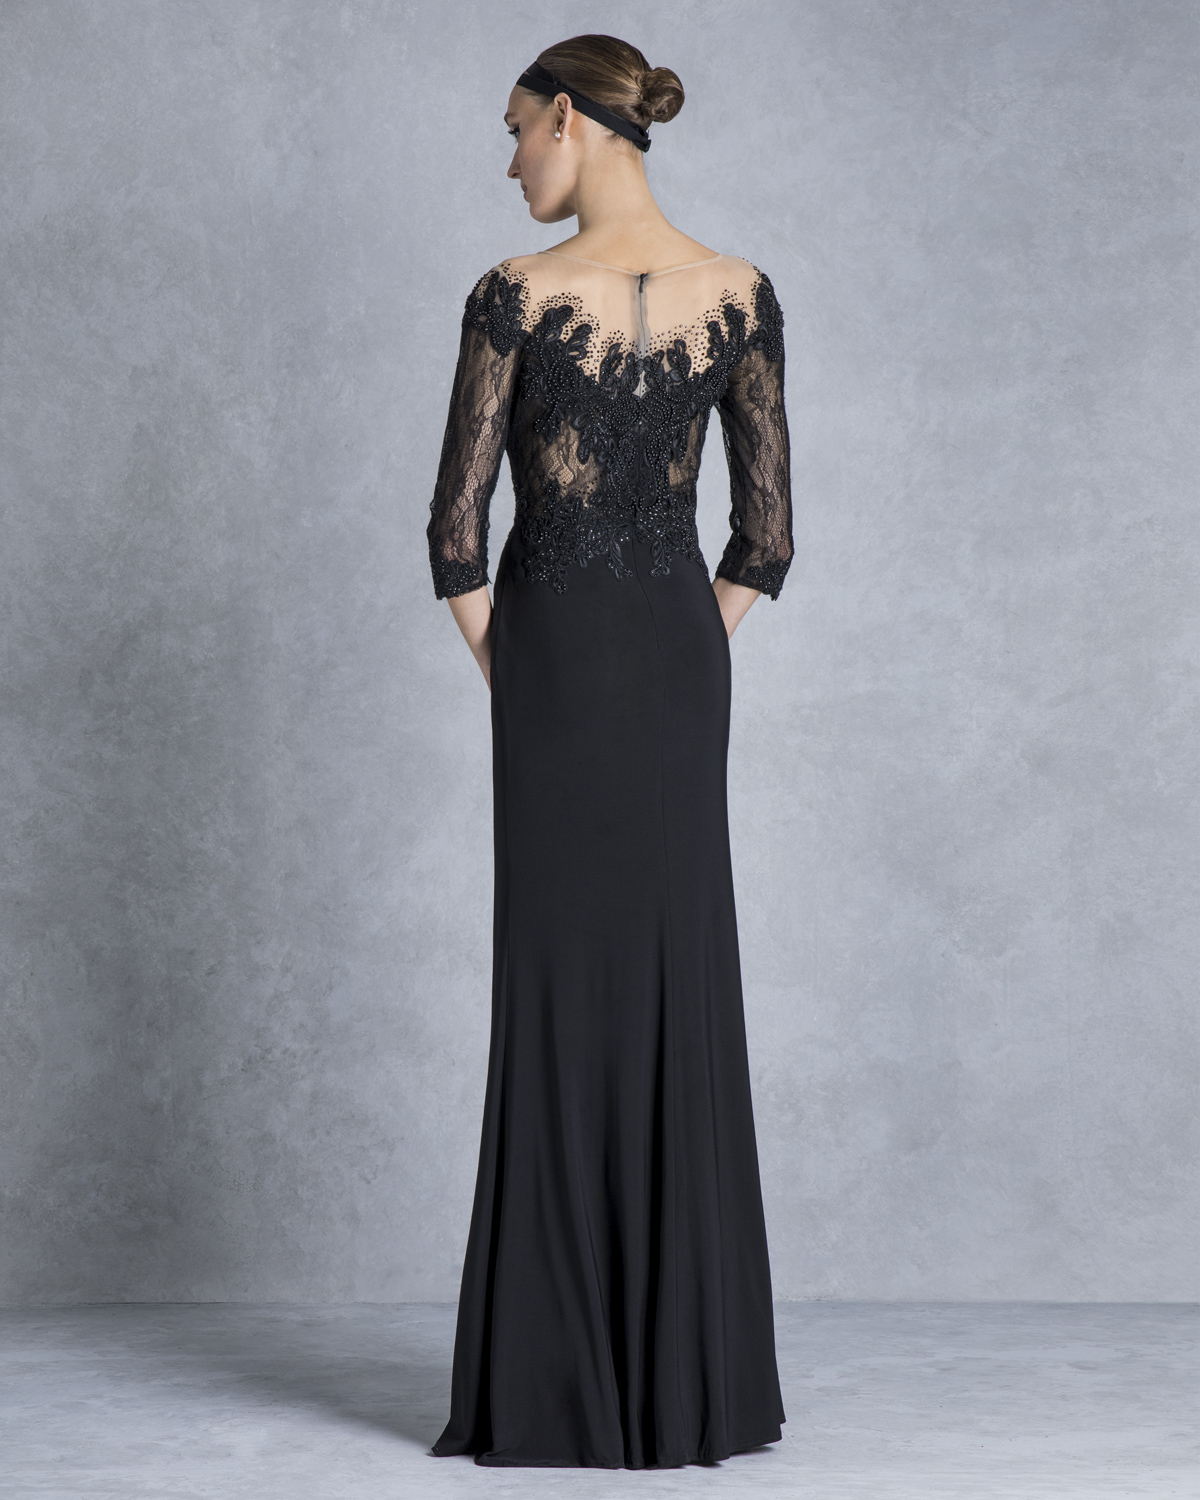 Evening Dresses / Long jersey evening dress with beaded top and lace sleeves